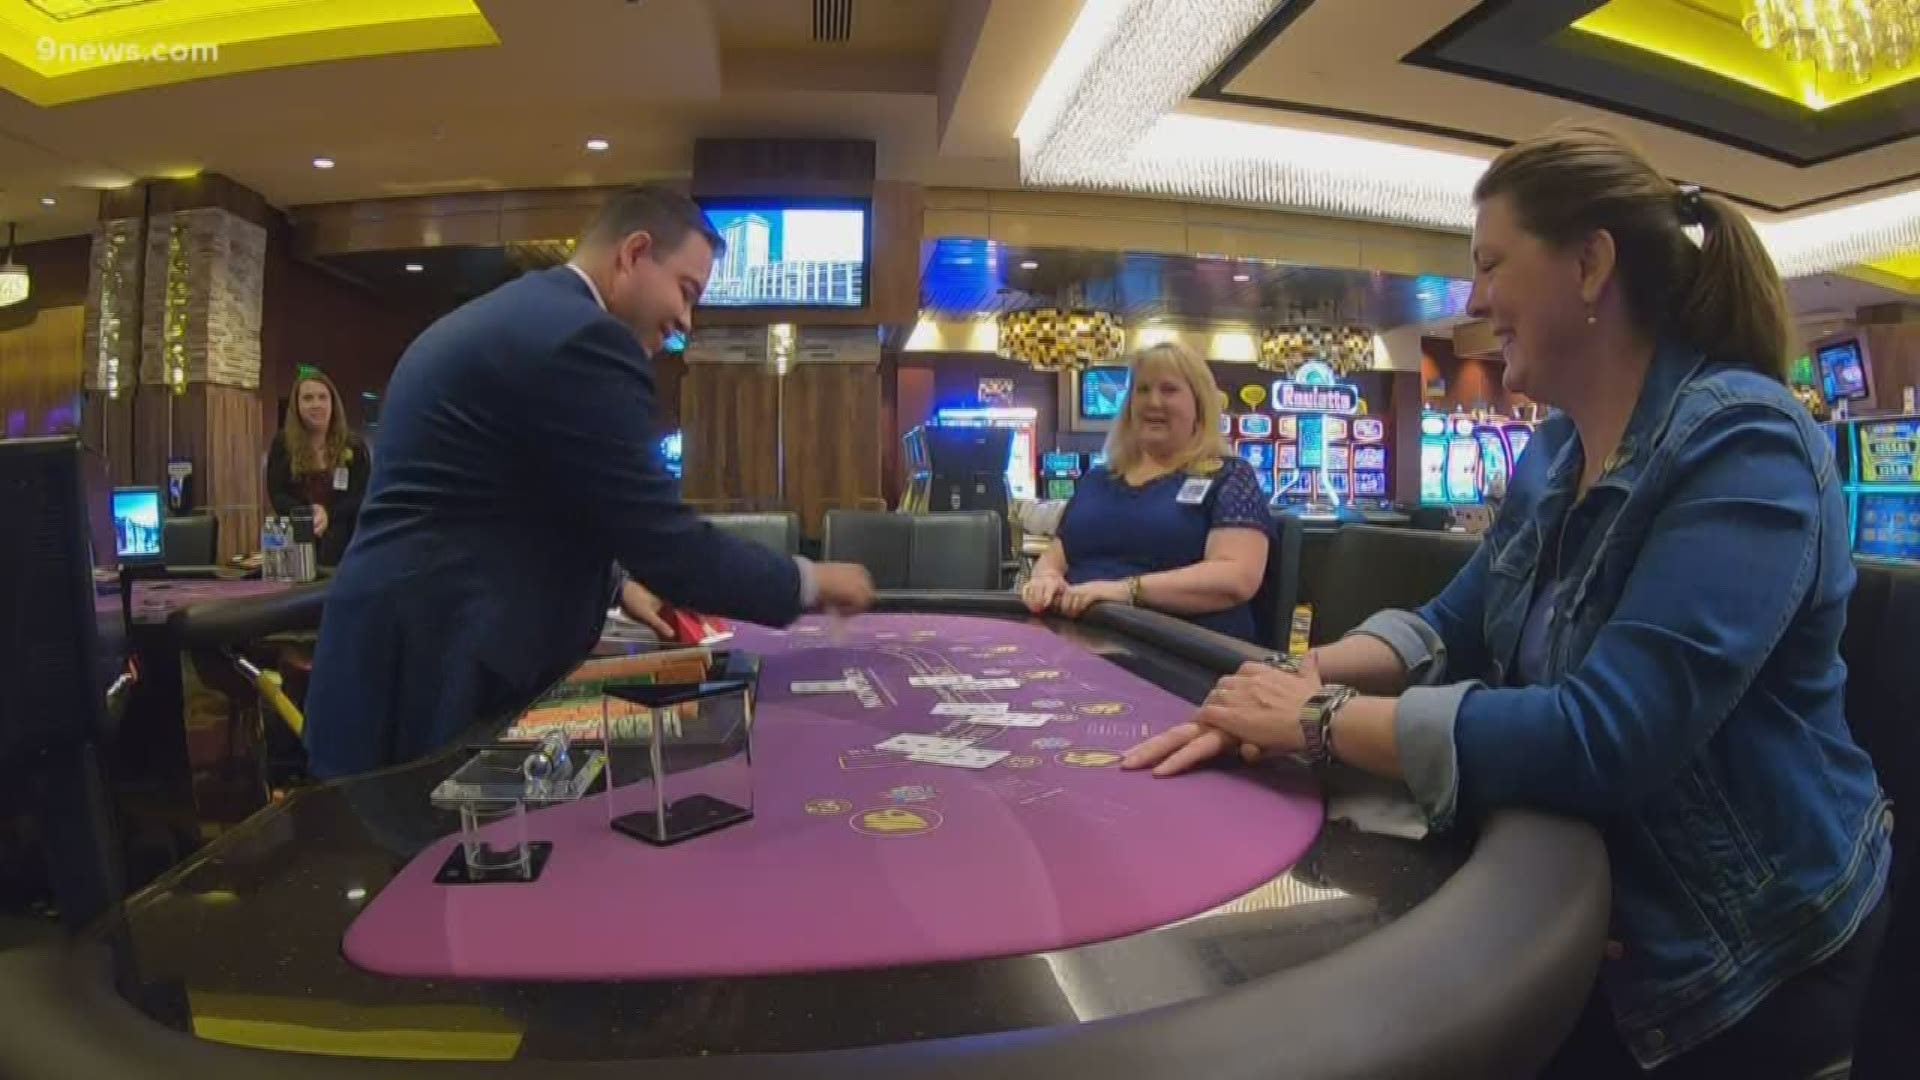 Getting paid to play games? The Monarch Casino in Blackhawk is starting up a school to train and hire dealers.